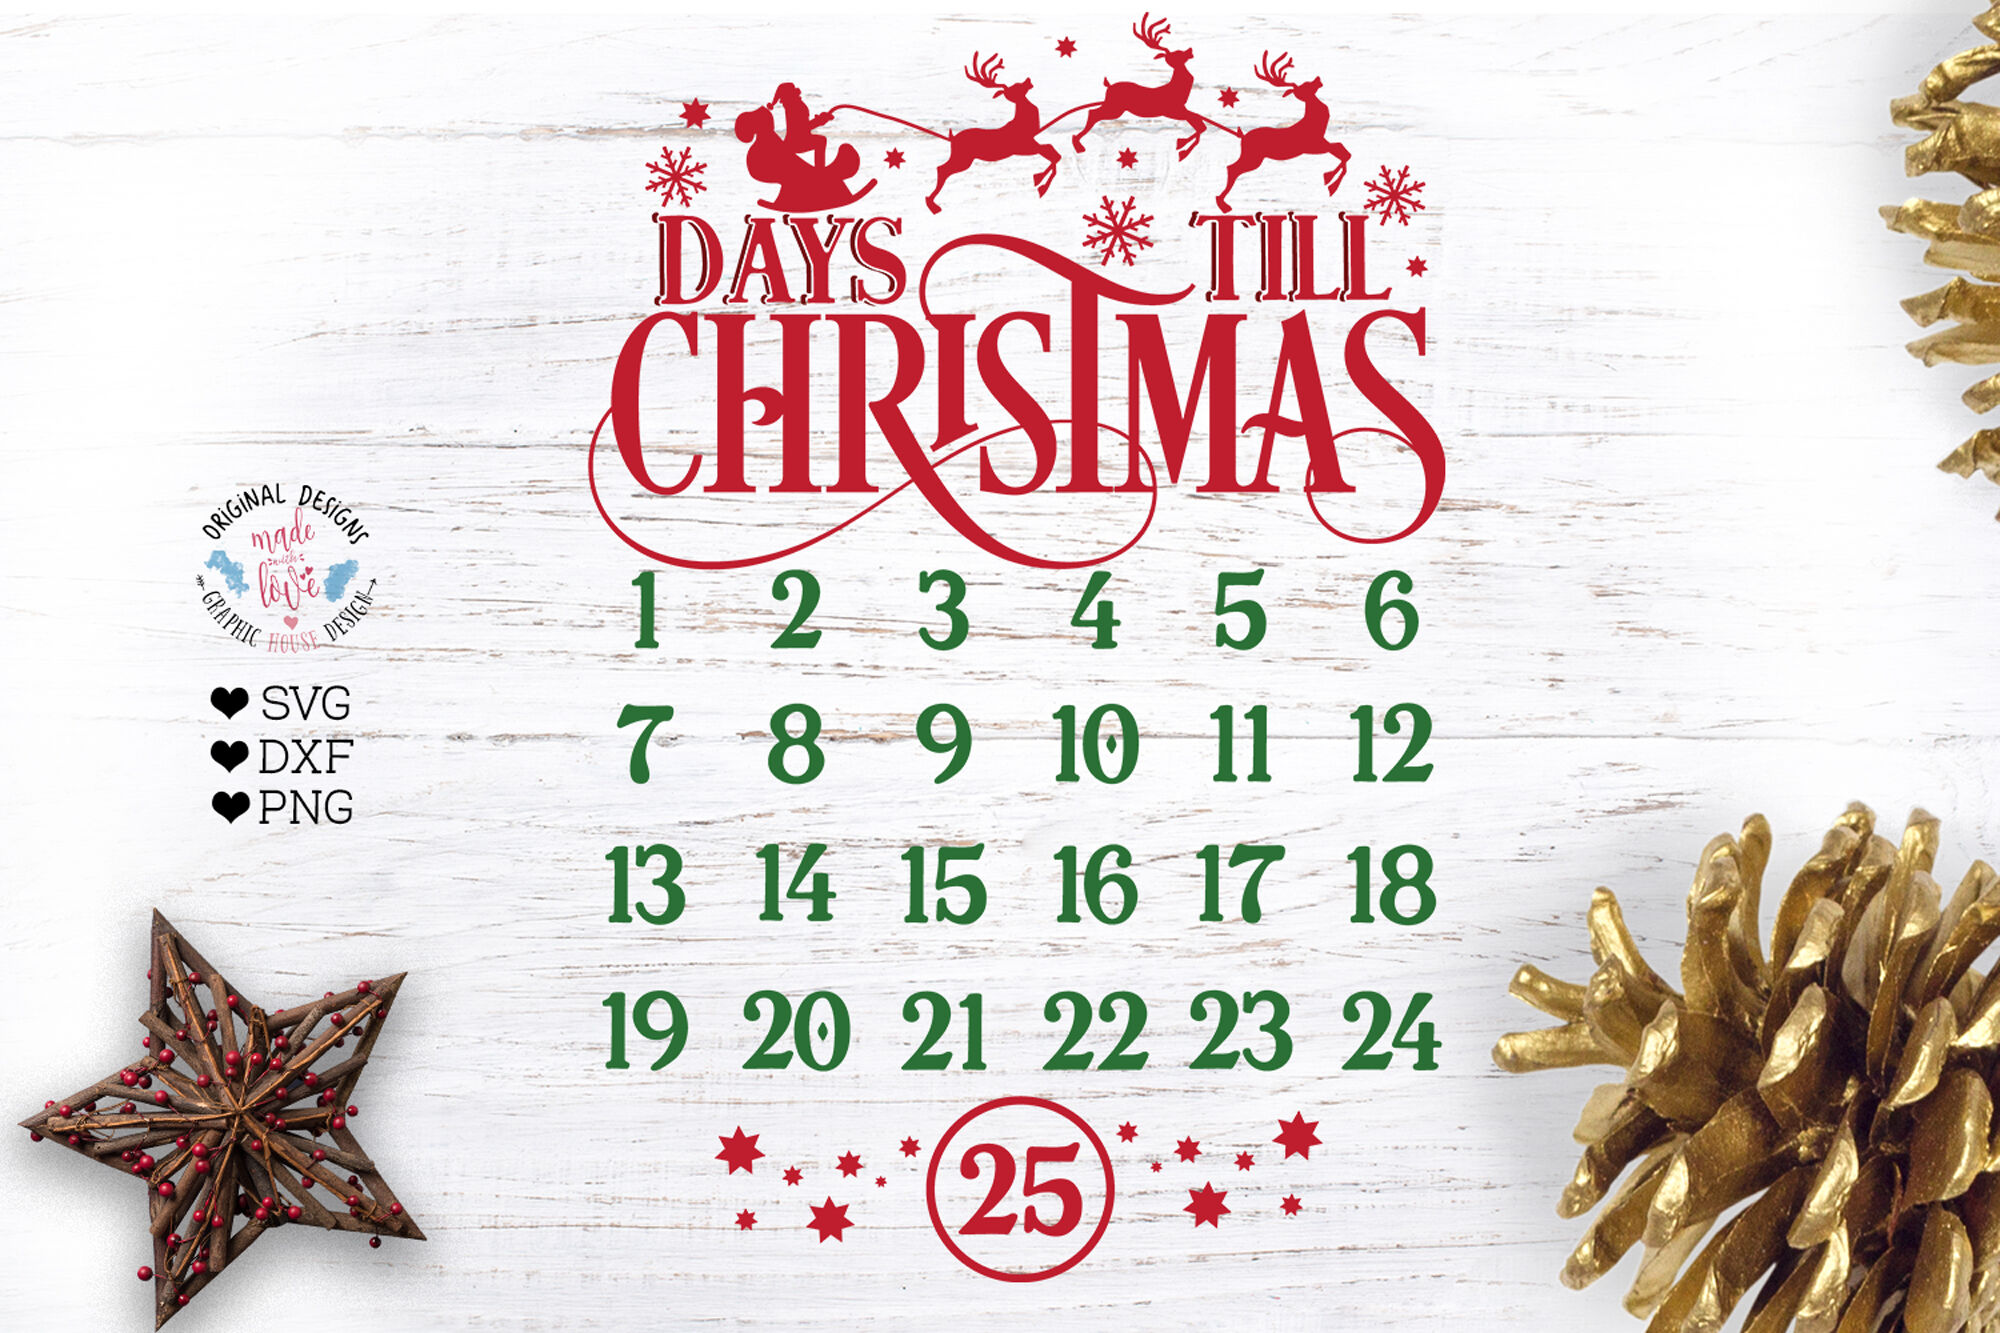 Days Till Christmas Countdown Calendar By GraphicHouseDesign